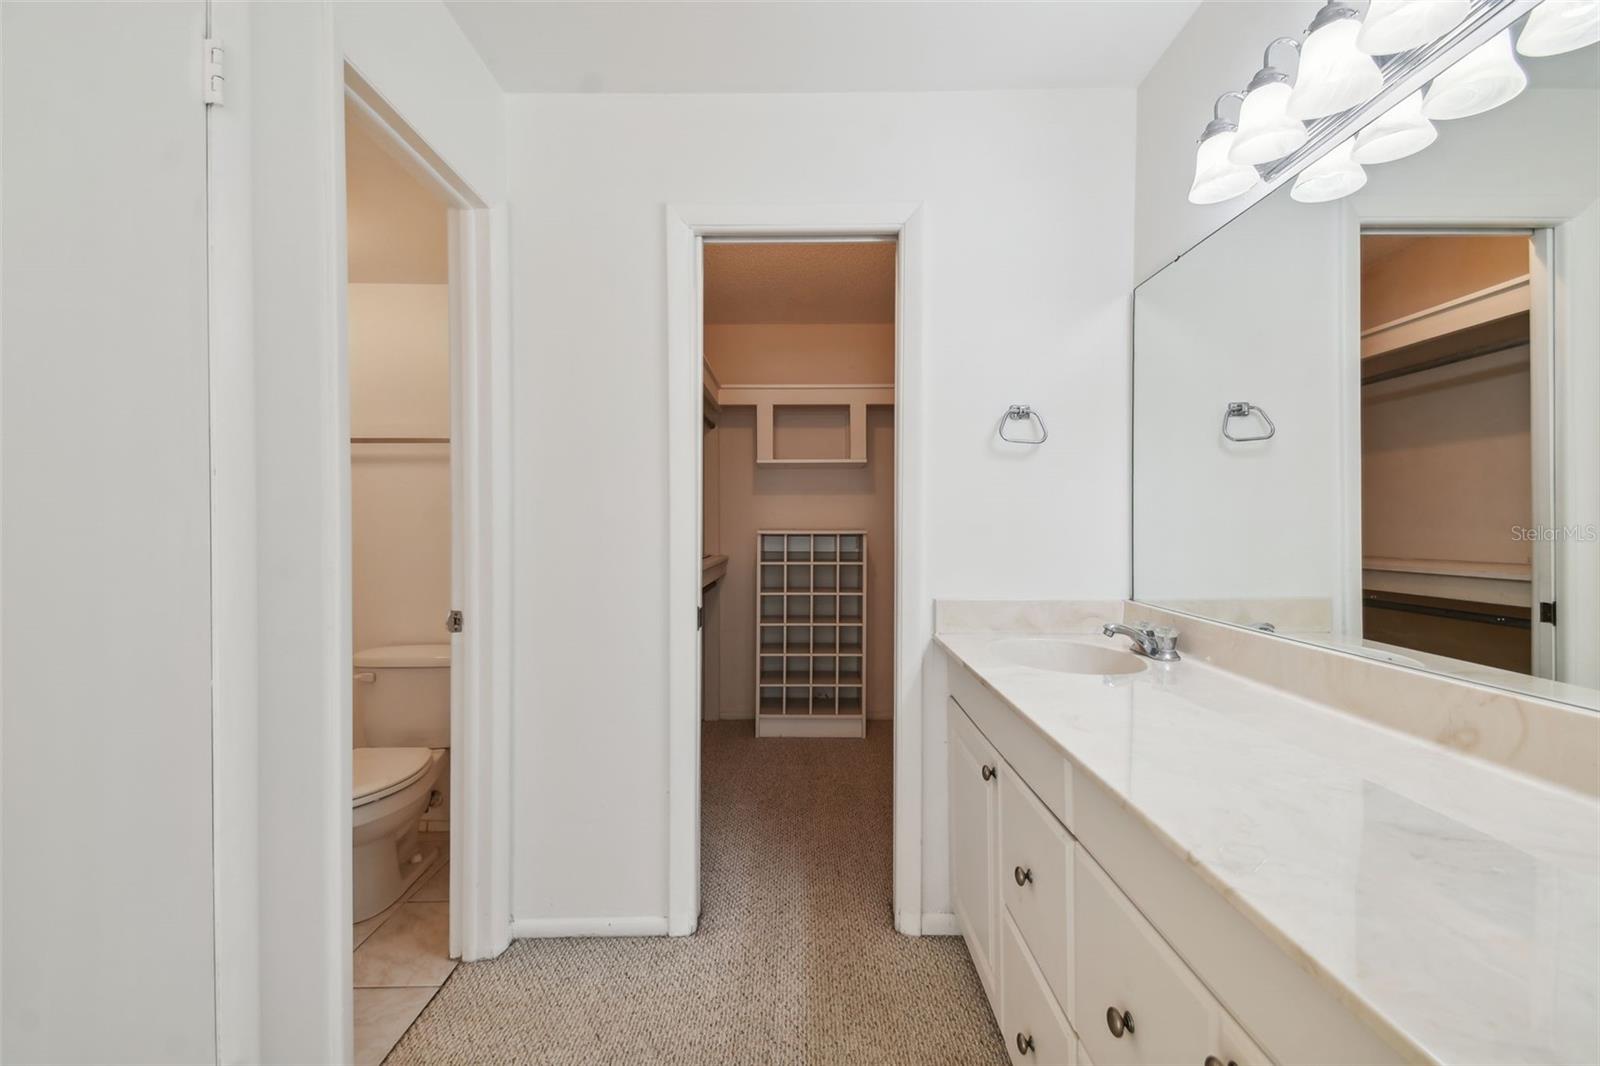 Primary bathroom includes a linen and walk-in closet